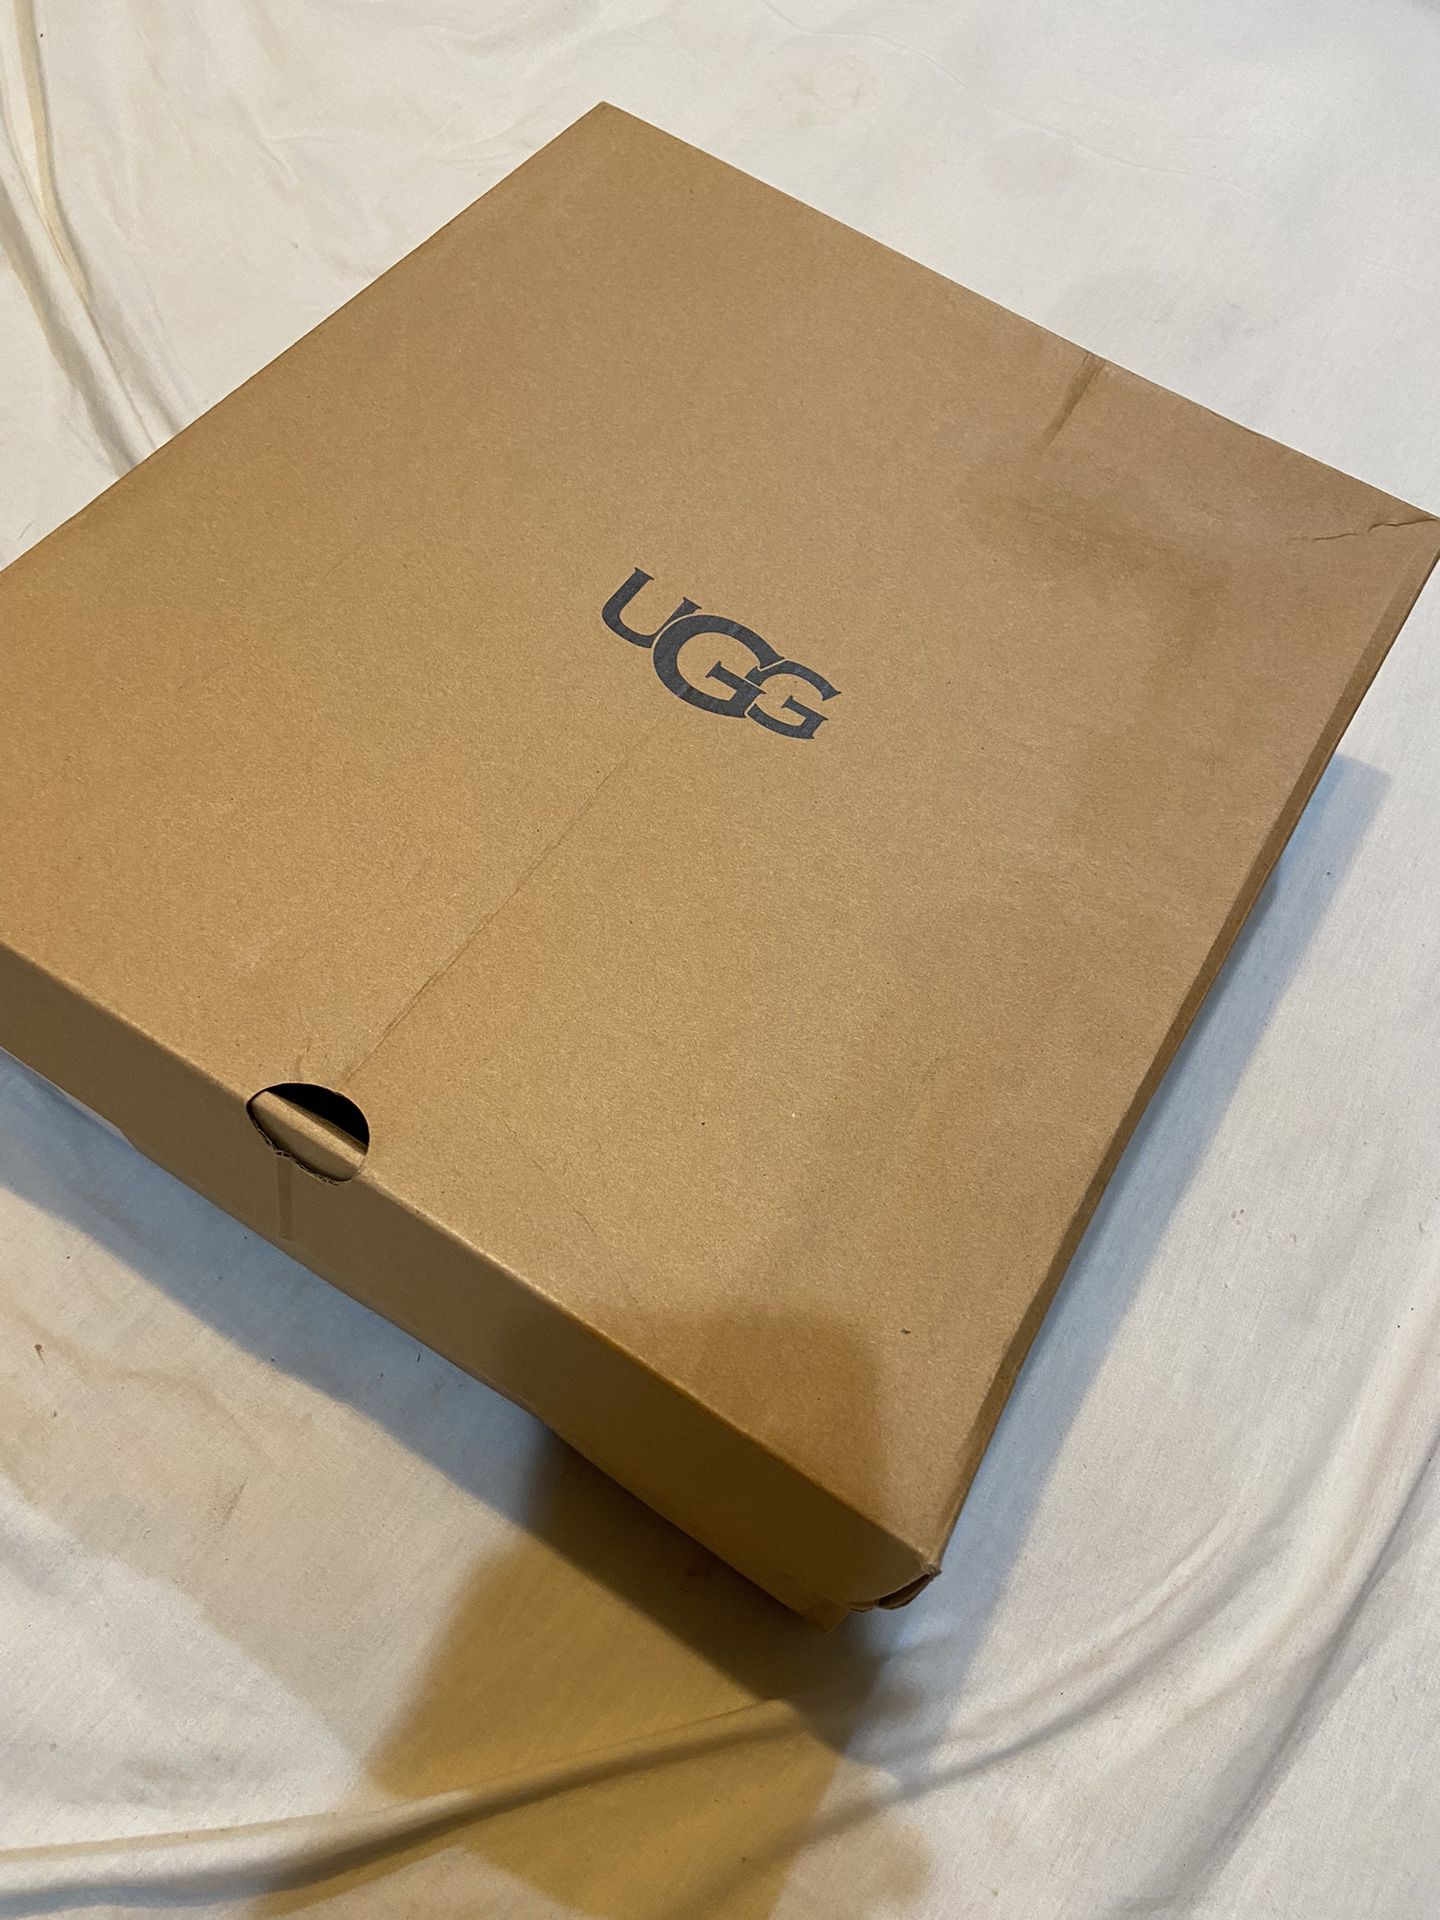 UGG BOOTS (size 10 )